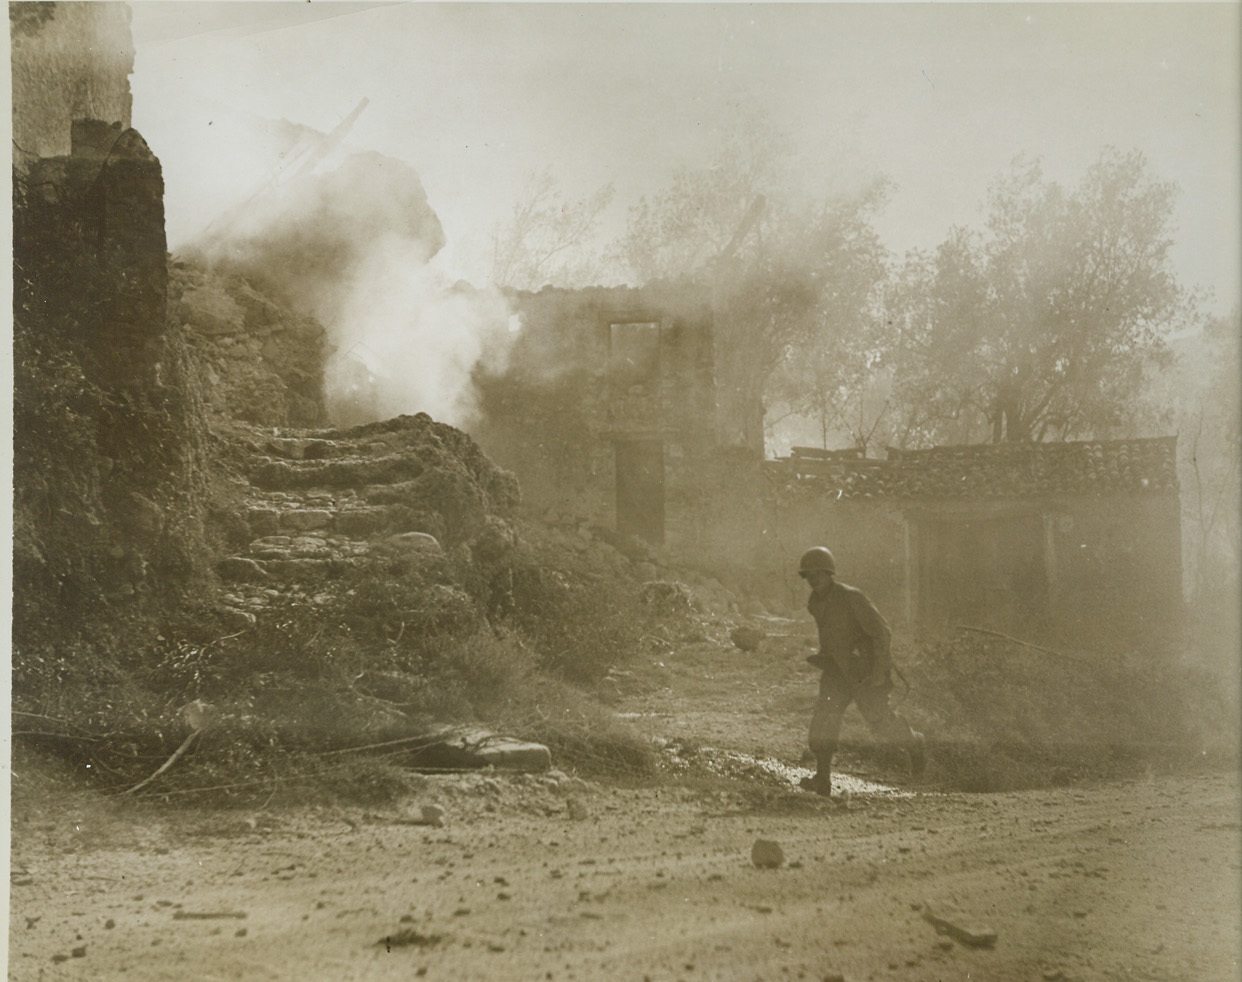 Busy Signal, 11/19/1943. Italy – A Signal Corps telephone lineman takes it on the double past a blazing house at Capriati, Italy, set afire by a direct hit from a German dive bomber. The picturesque Italian dwelling is just one more inanimate casualty of war. Credit (ACME Photo by Bert Brant, War Pool Correspondent);